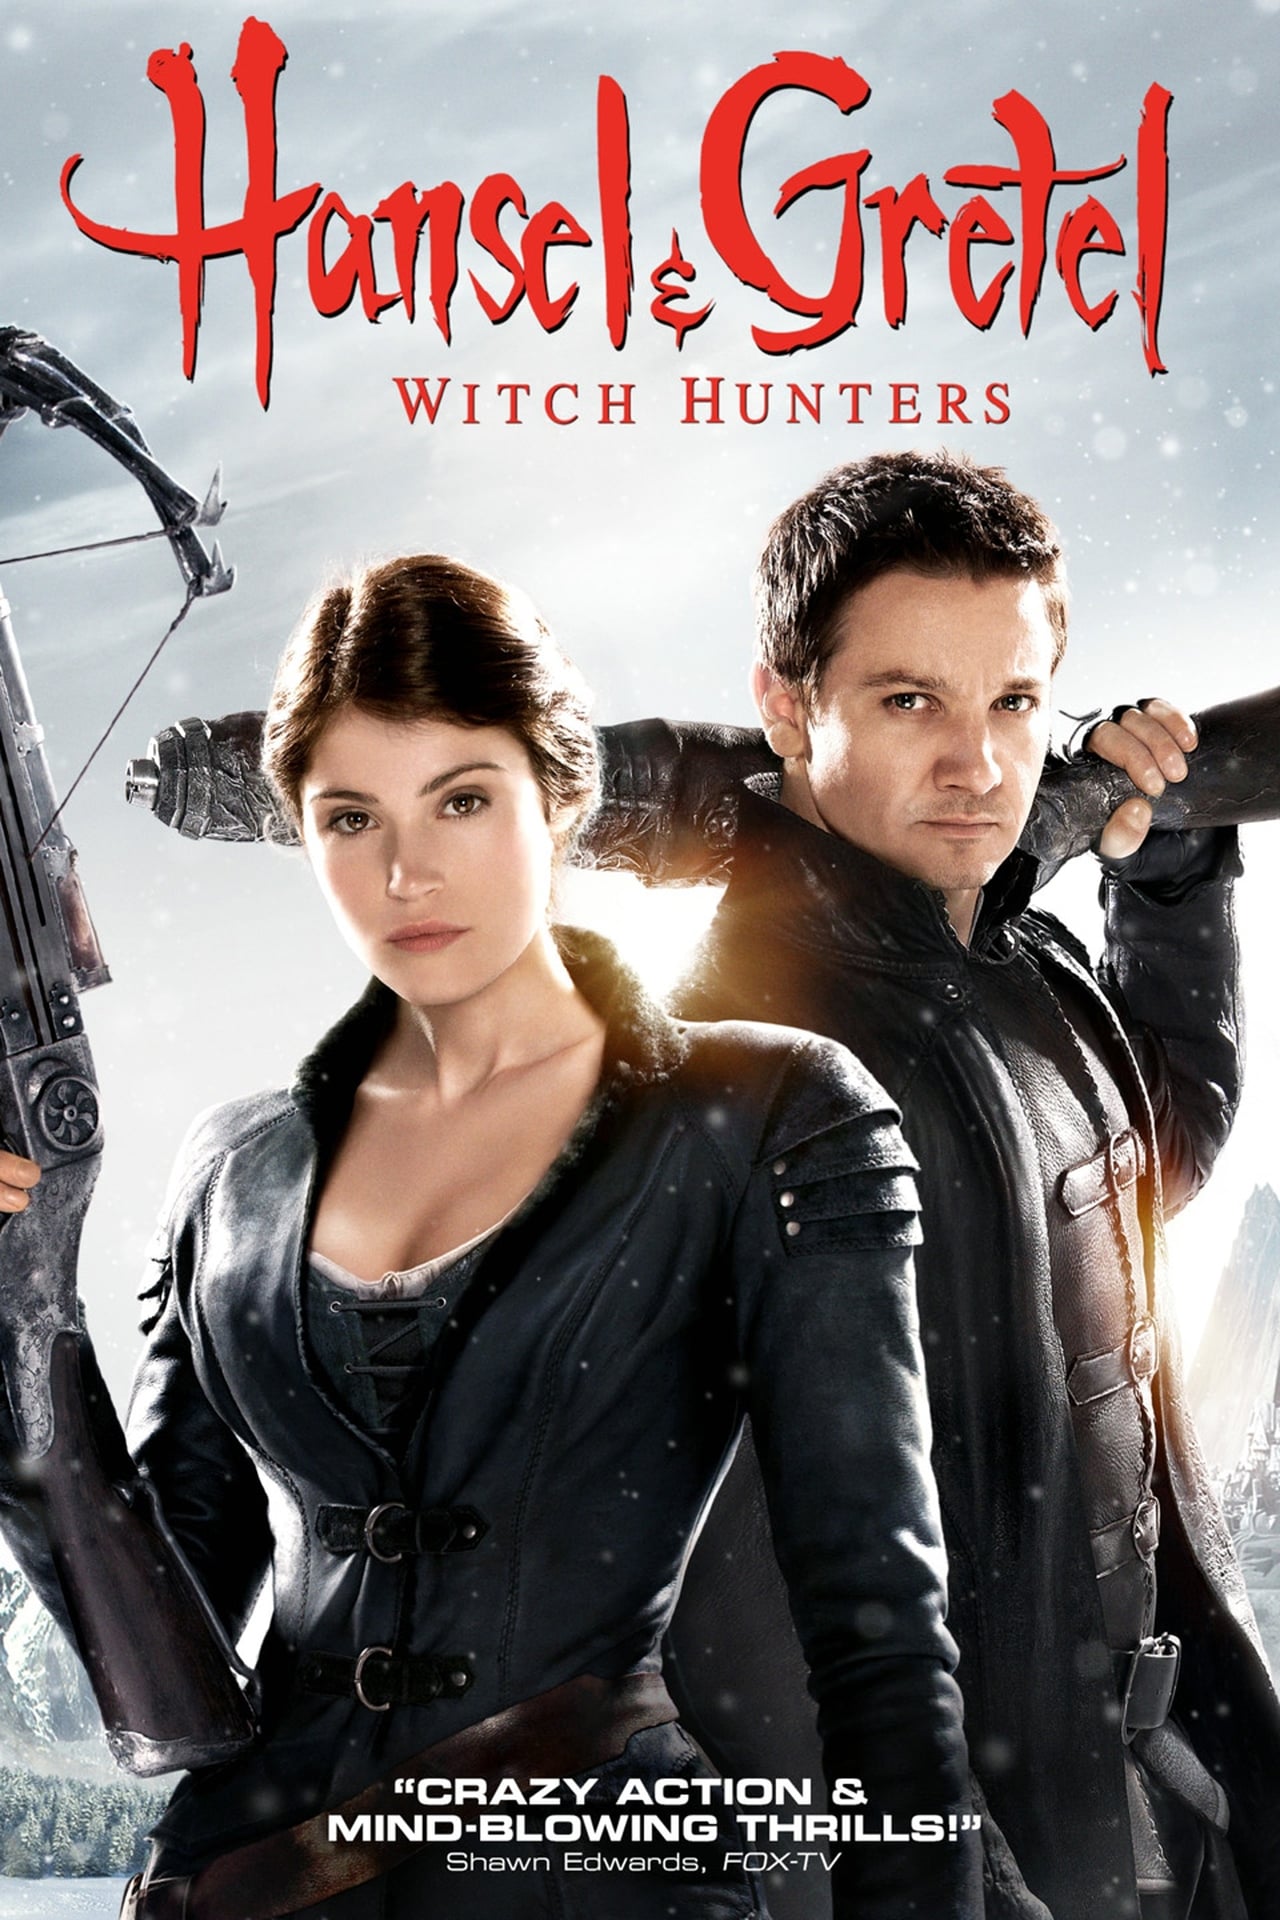 Hansel & Gretel: Witch Hunters (2013) Unrated Cut 640Kbps 23.976Fps 48Khz 5.1Ch BluRay Turkish Audio TAC